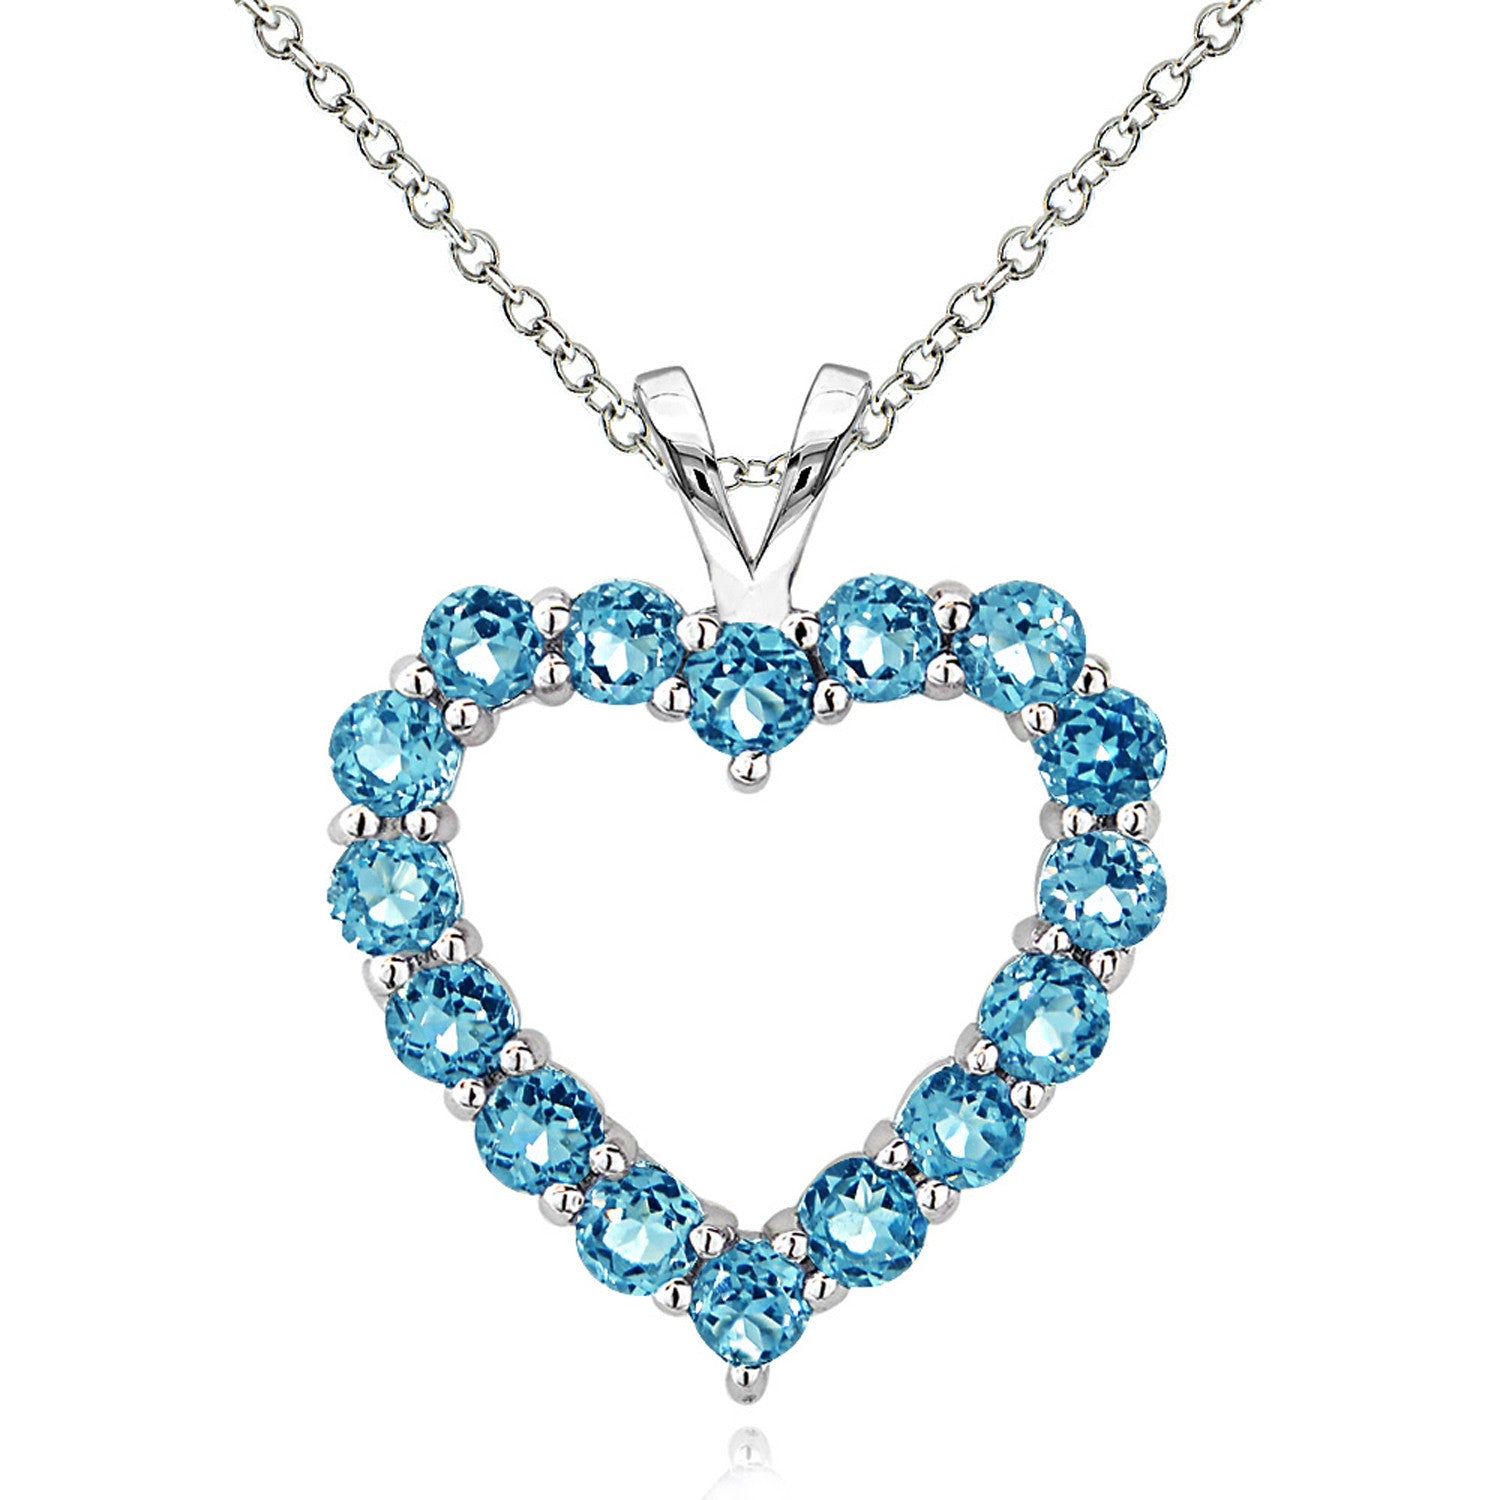 Open Heart Birthstone Necklace in Sterling Silver - March Aquamarine